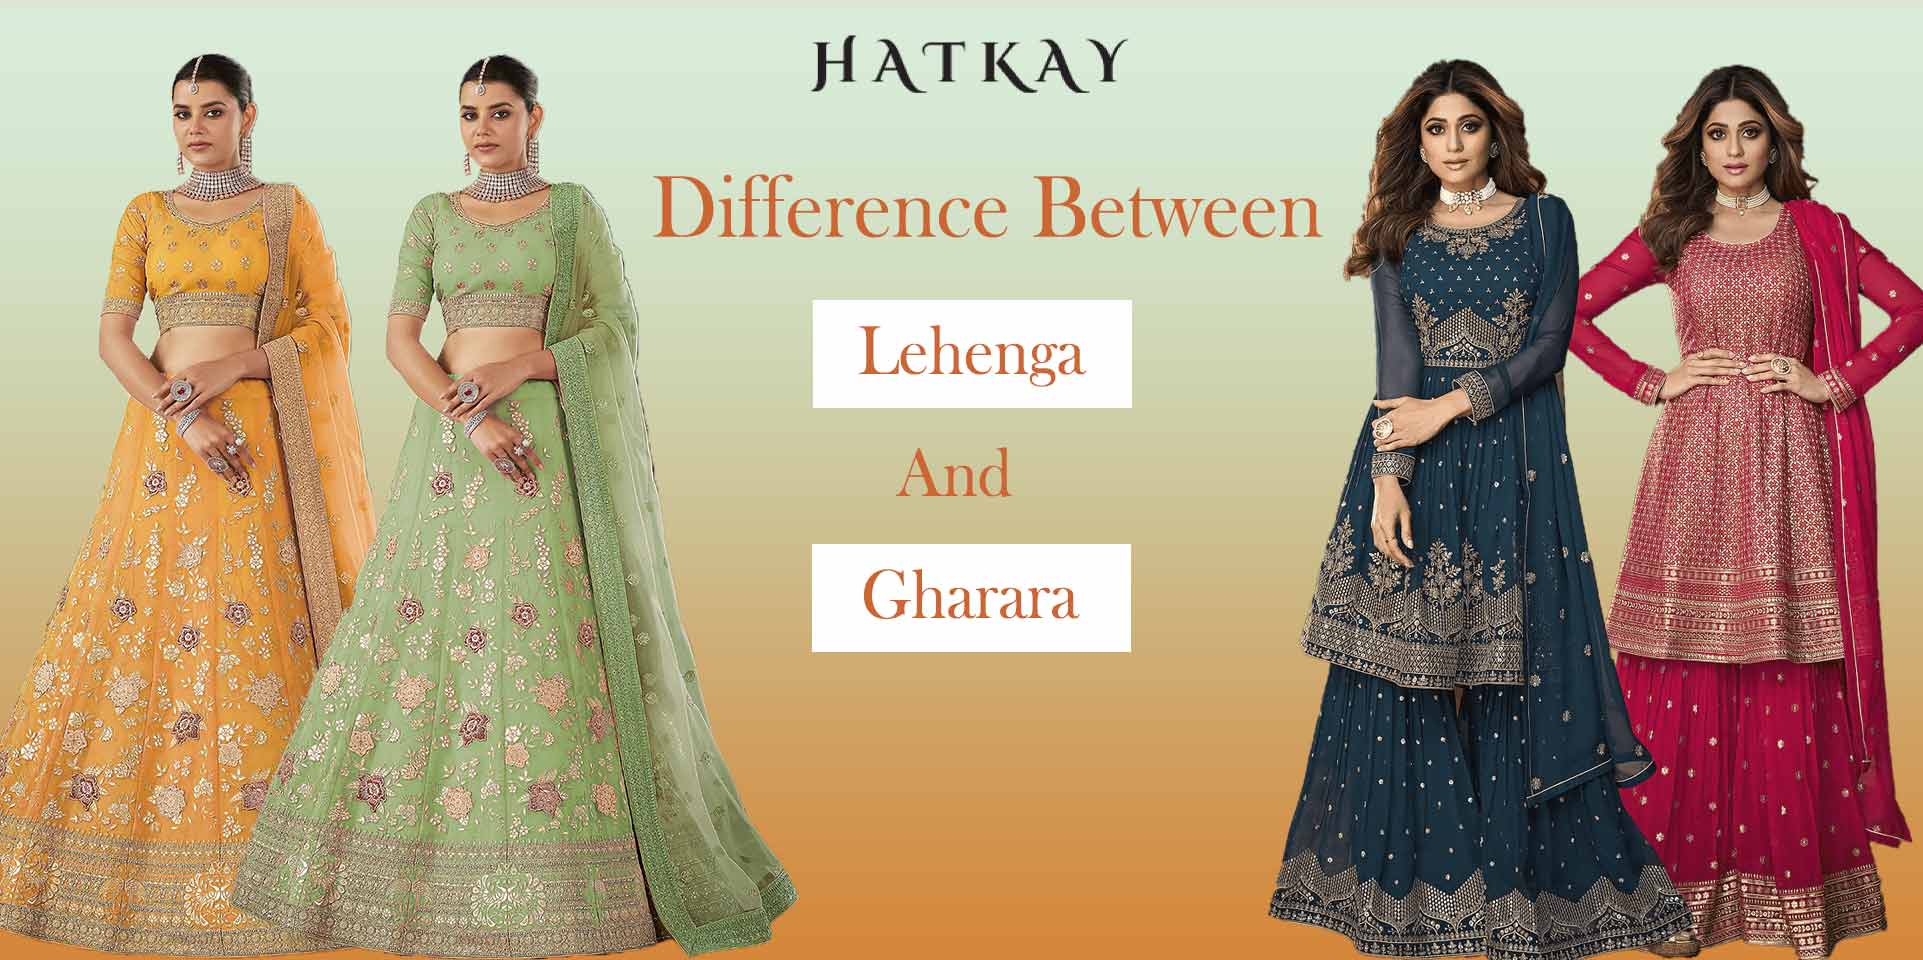 What is the Difference Between Lehenga and Gharara?